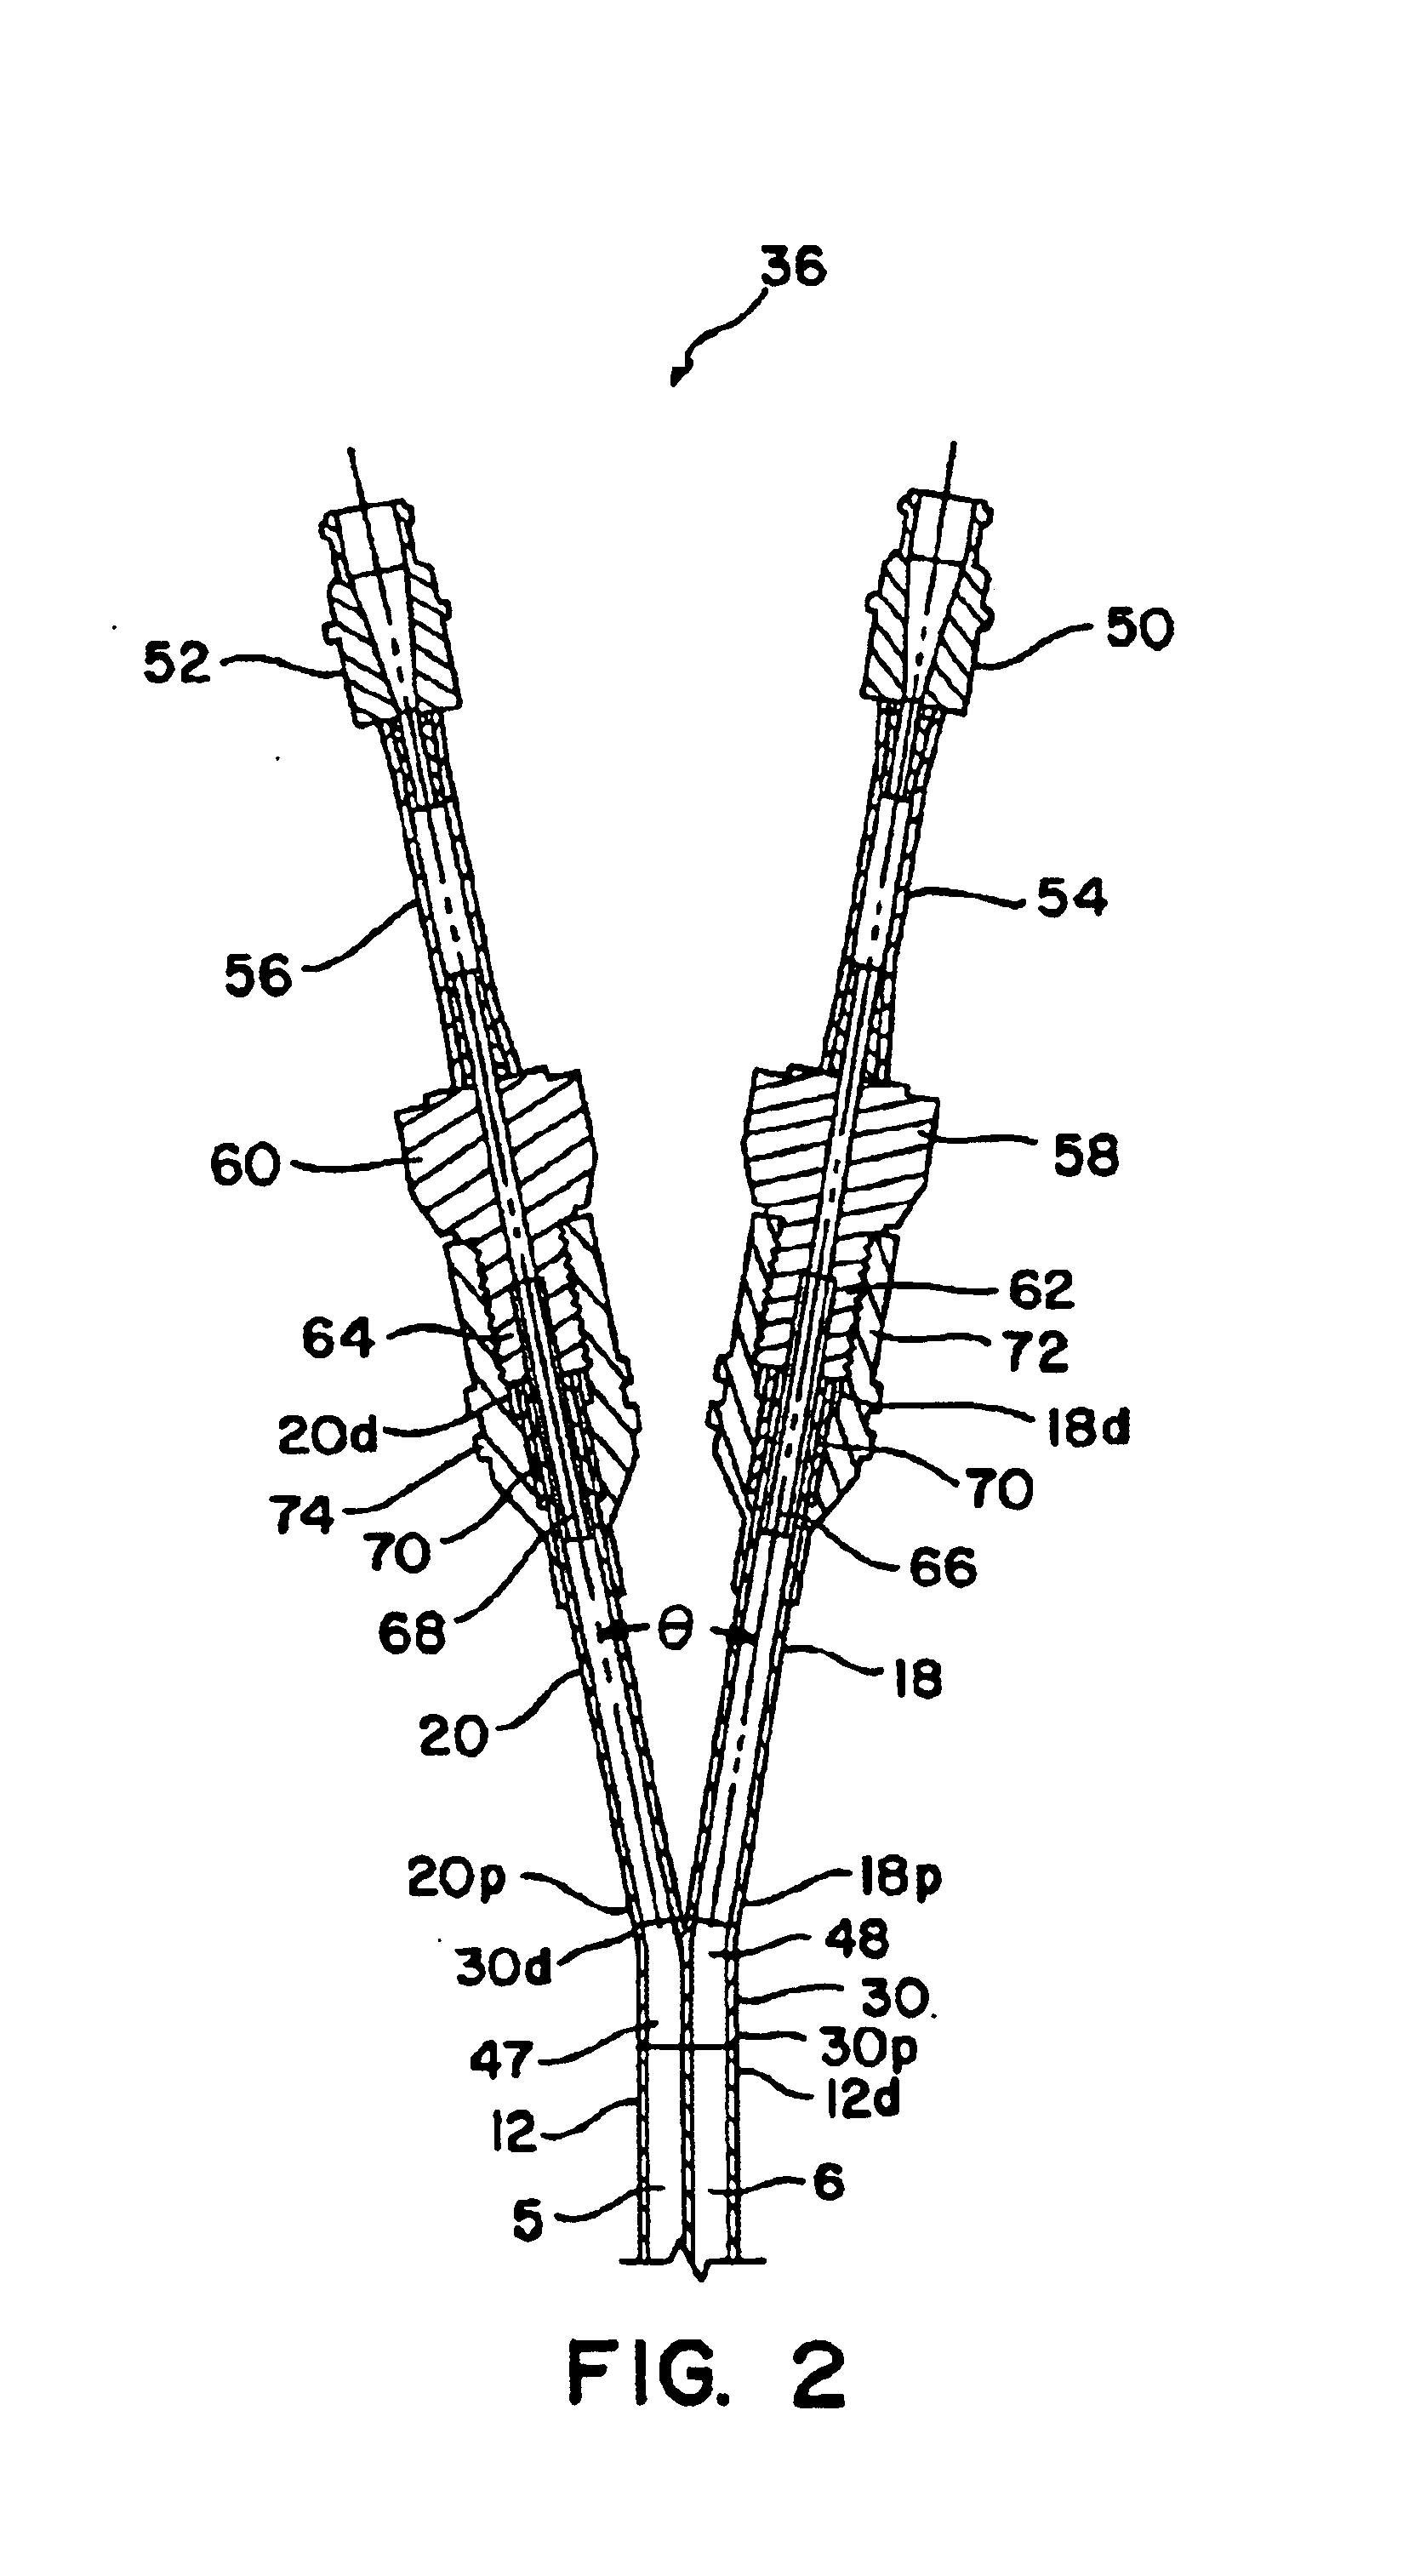 Double-y-shaped multi-lumen catheter with selectively attachable hubs